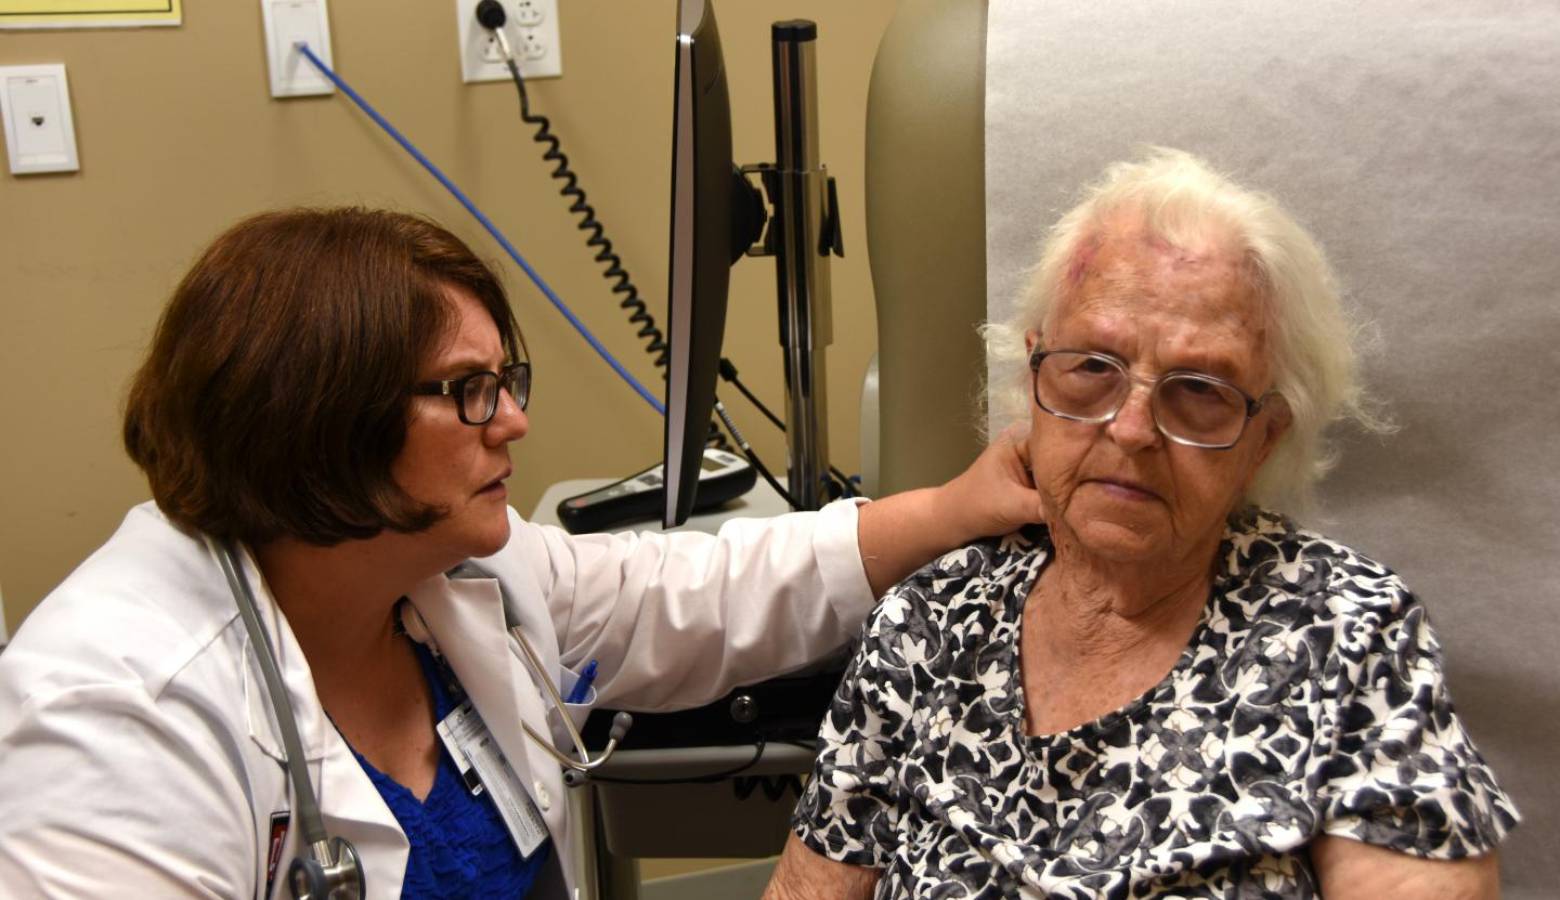 Jennifer Carnahan, MD of the Regenstrief Institute and Indiana University Center for Aging Research and Indiana University School of Medicine examines an Eskenazi Health patient. (Photo courtesy of Eskenazi)